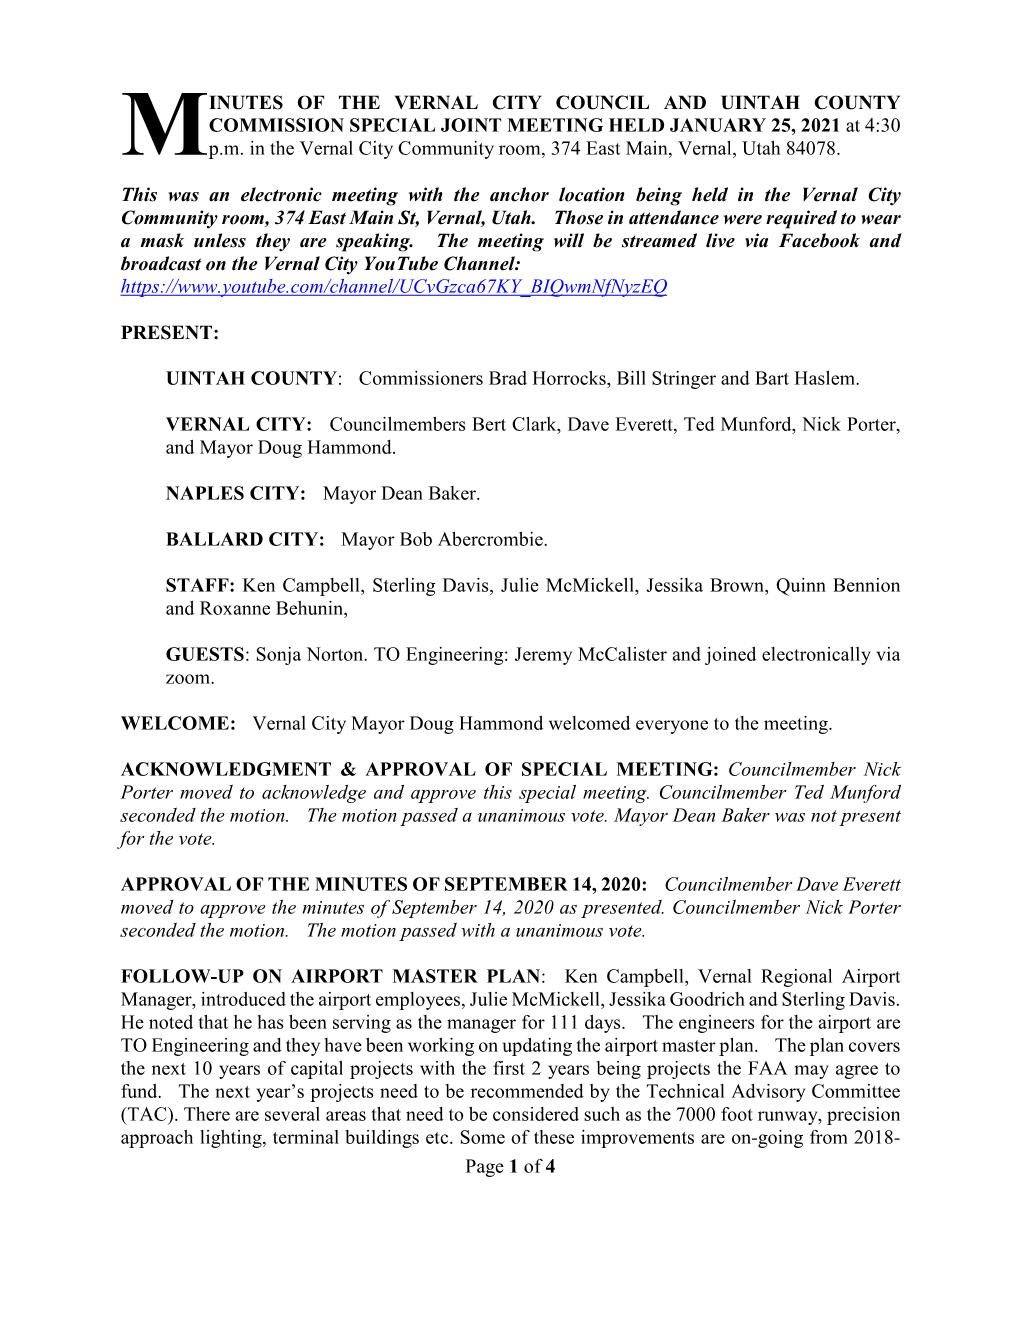 Page 1 of 4 INUTES of the VERNAL CITY COUNCIL and UINTAH COUNTY COMMISSION SPECIAL JOINT MEETING HELD JANUARY 25, 2021 at 4:30 P